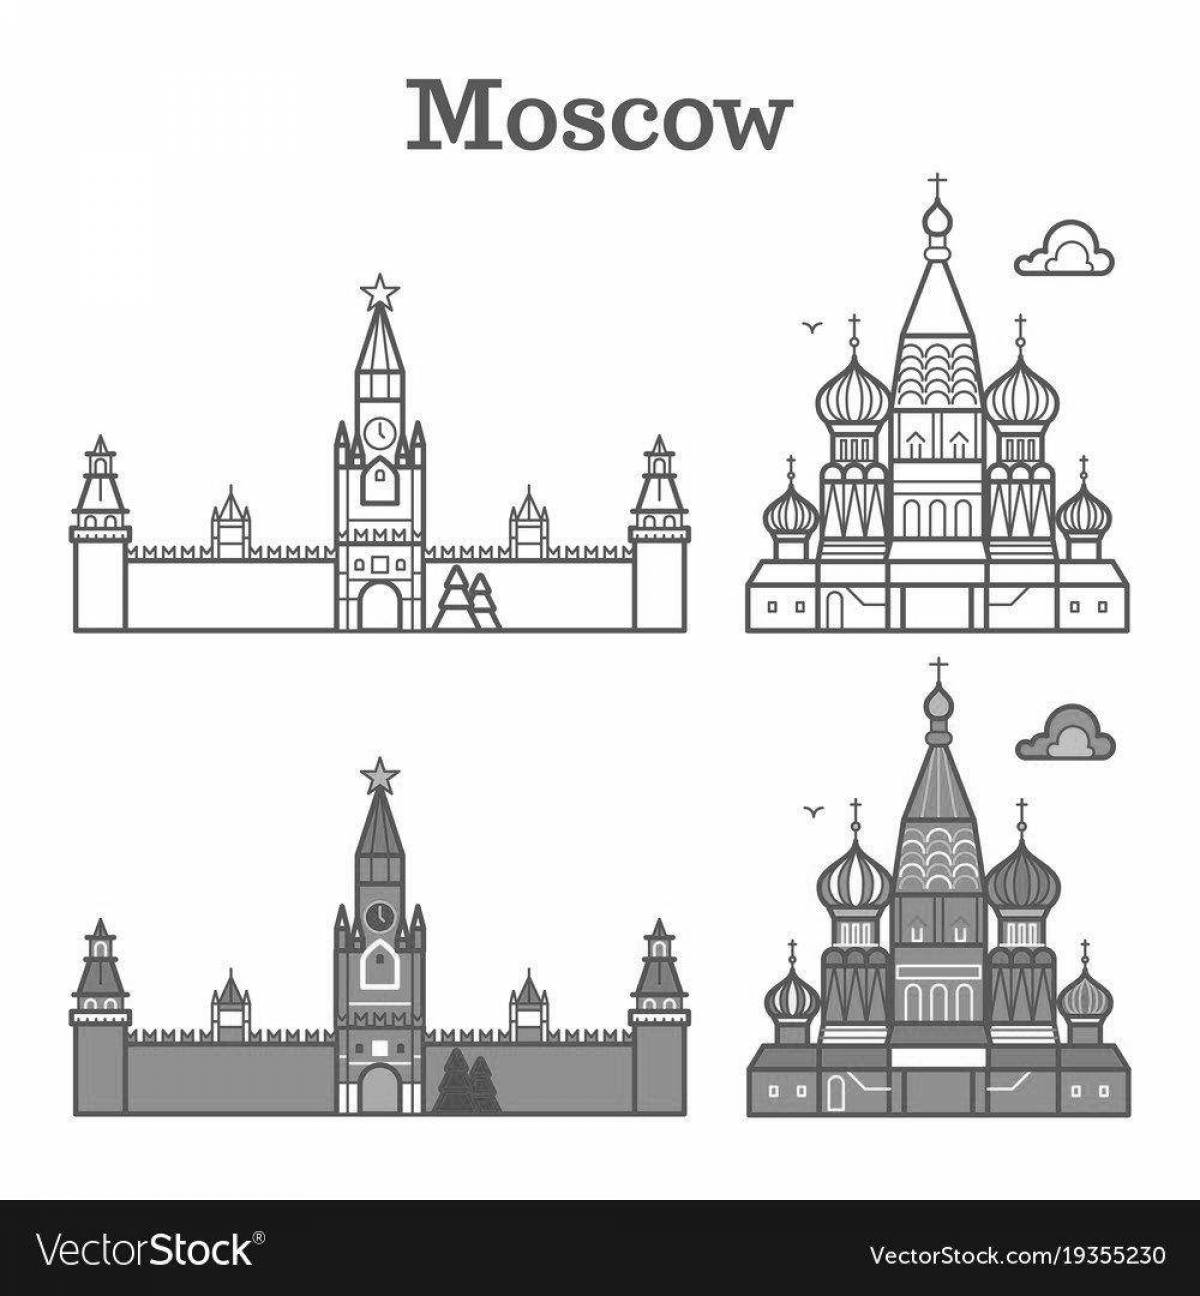 Brilliant sights of moscow